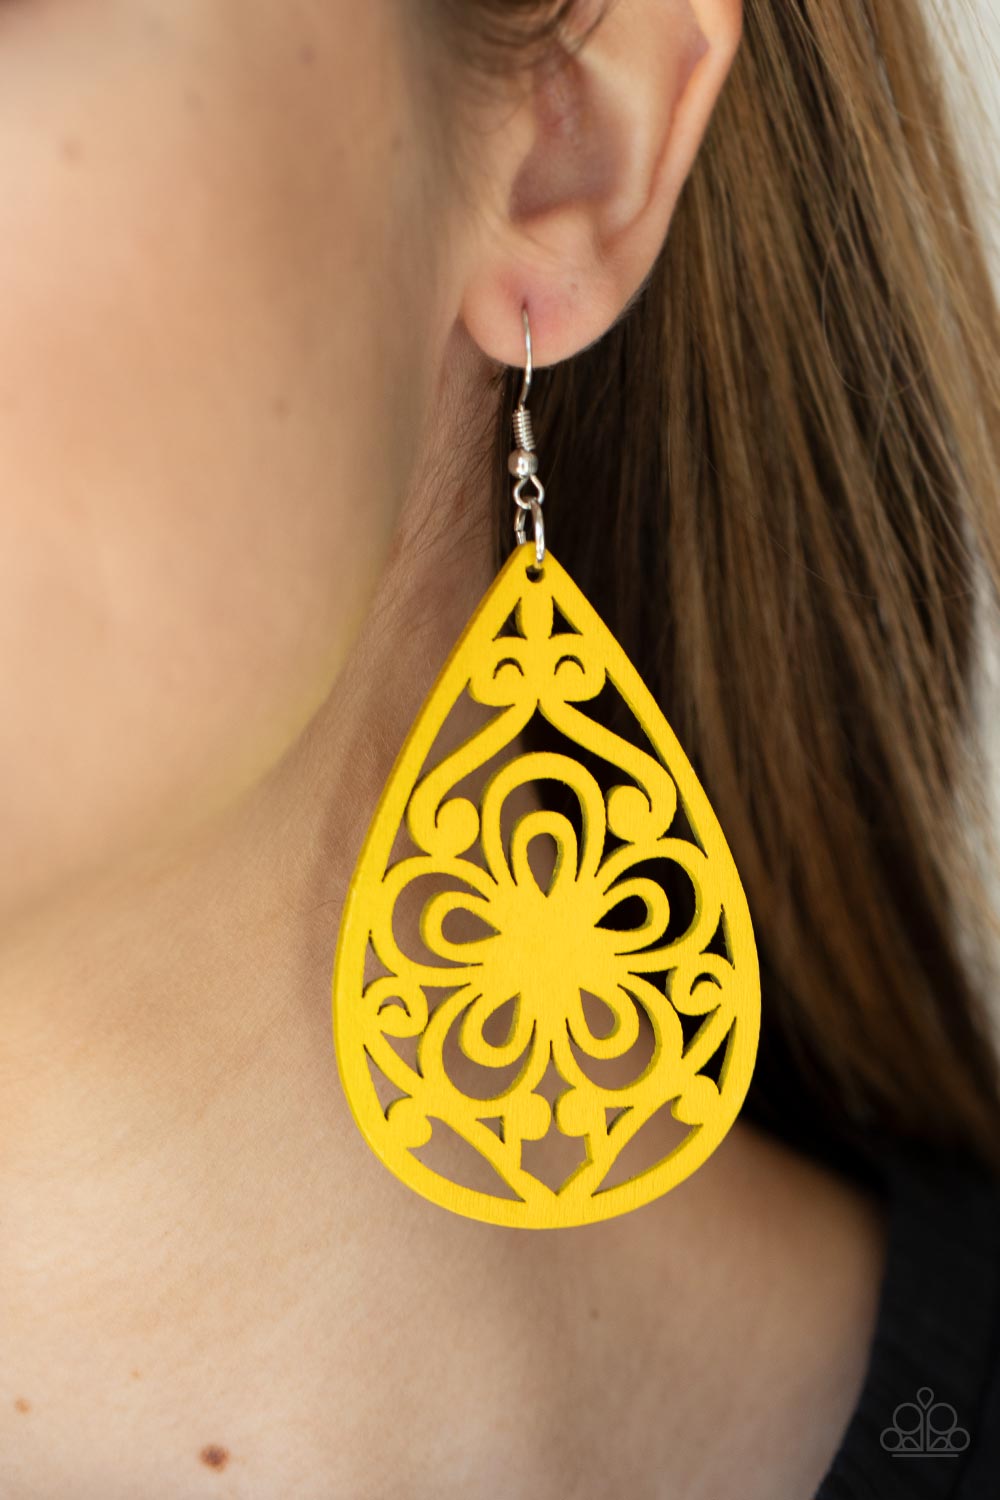 Marine Eden Yellow Wood Earrings - Paparazzi Accessories-on model - CarasShop.com - $5 Jewelry by Cara Jewels